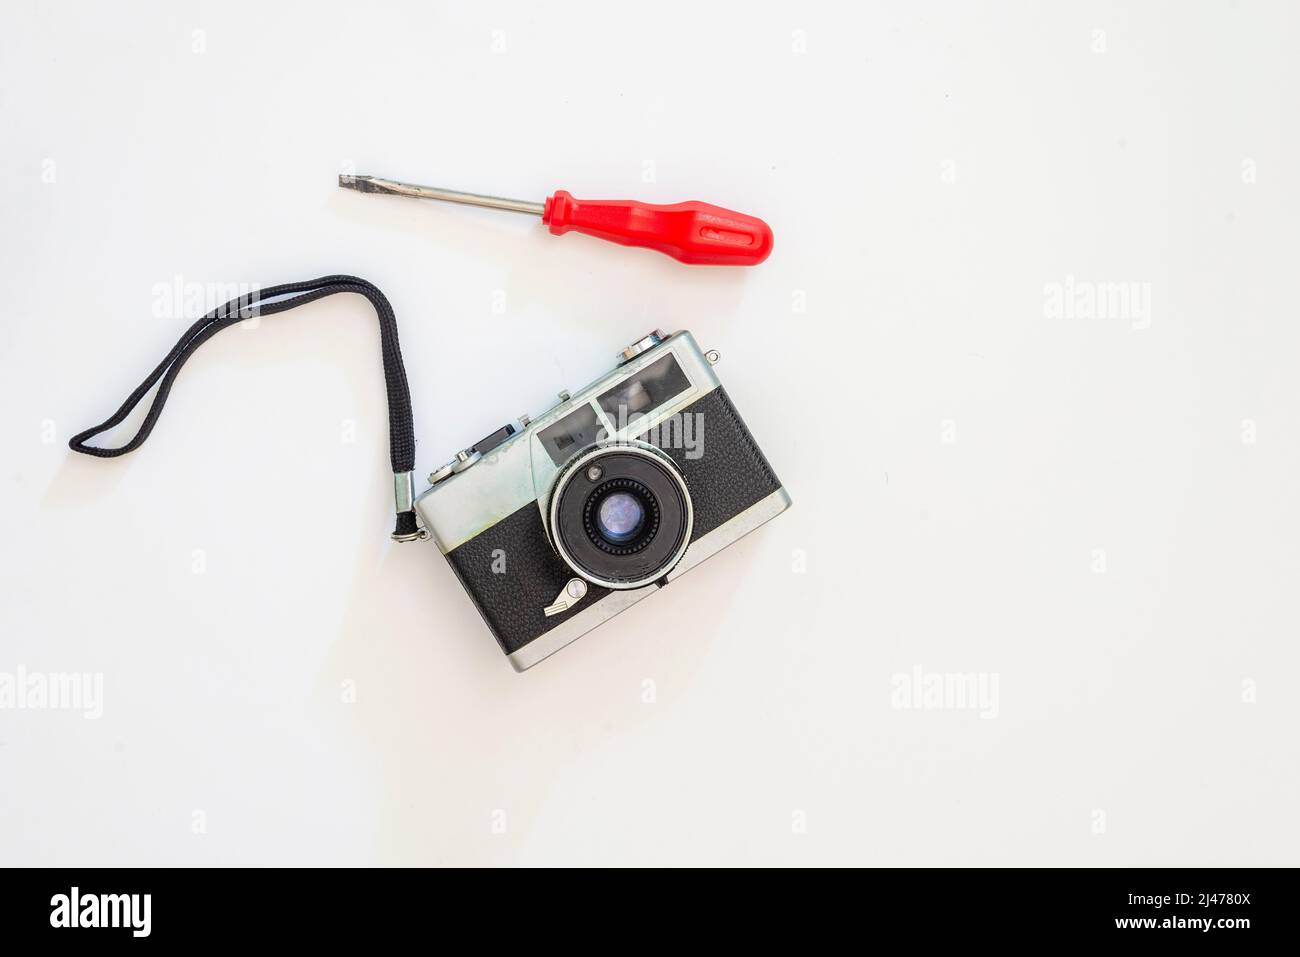 Old film photo camera and a screwdriver on a white background. Salvador, Bahia, Brazil. Stock Photo